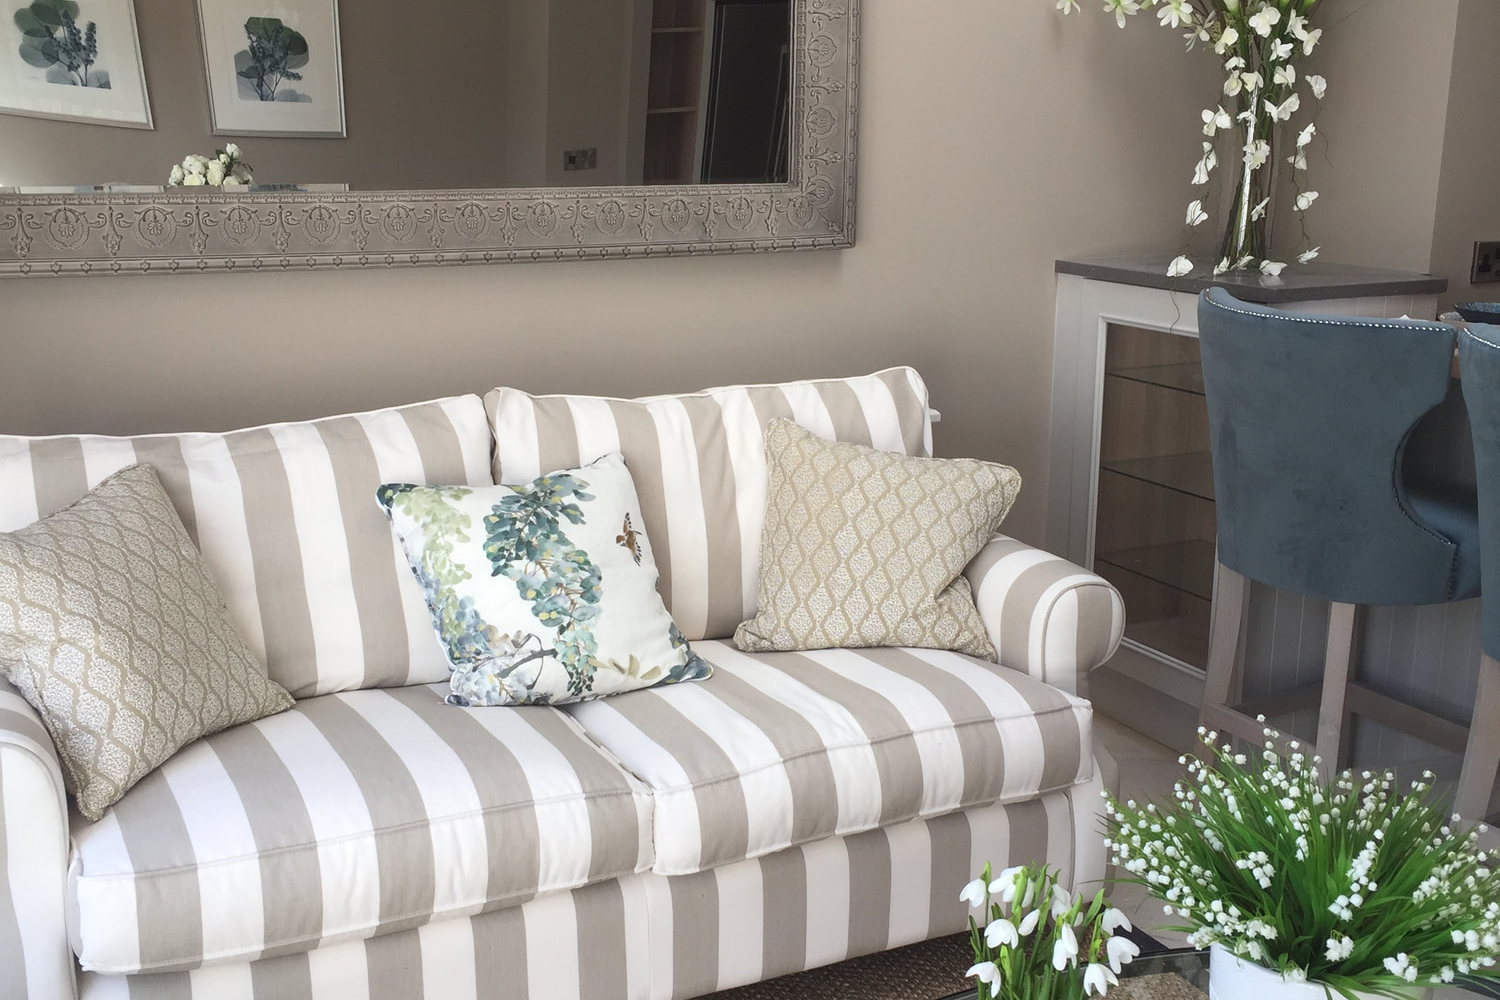 Upholstery services in Dublin